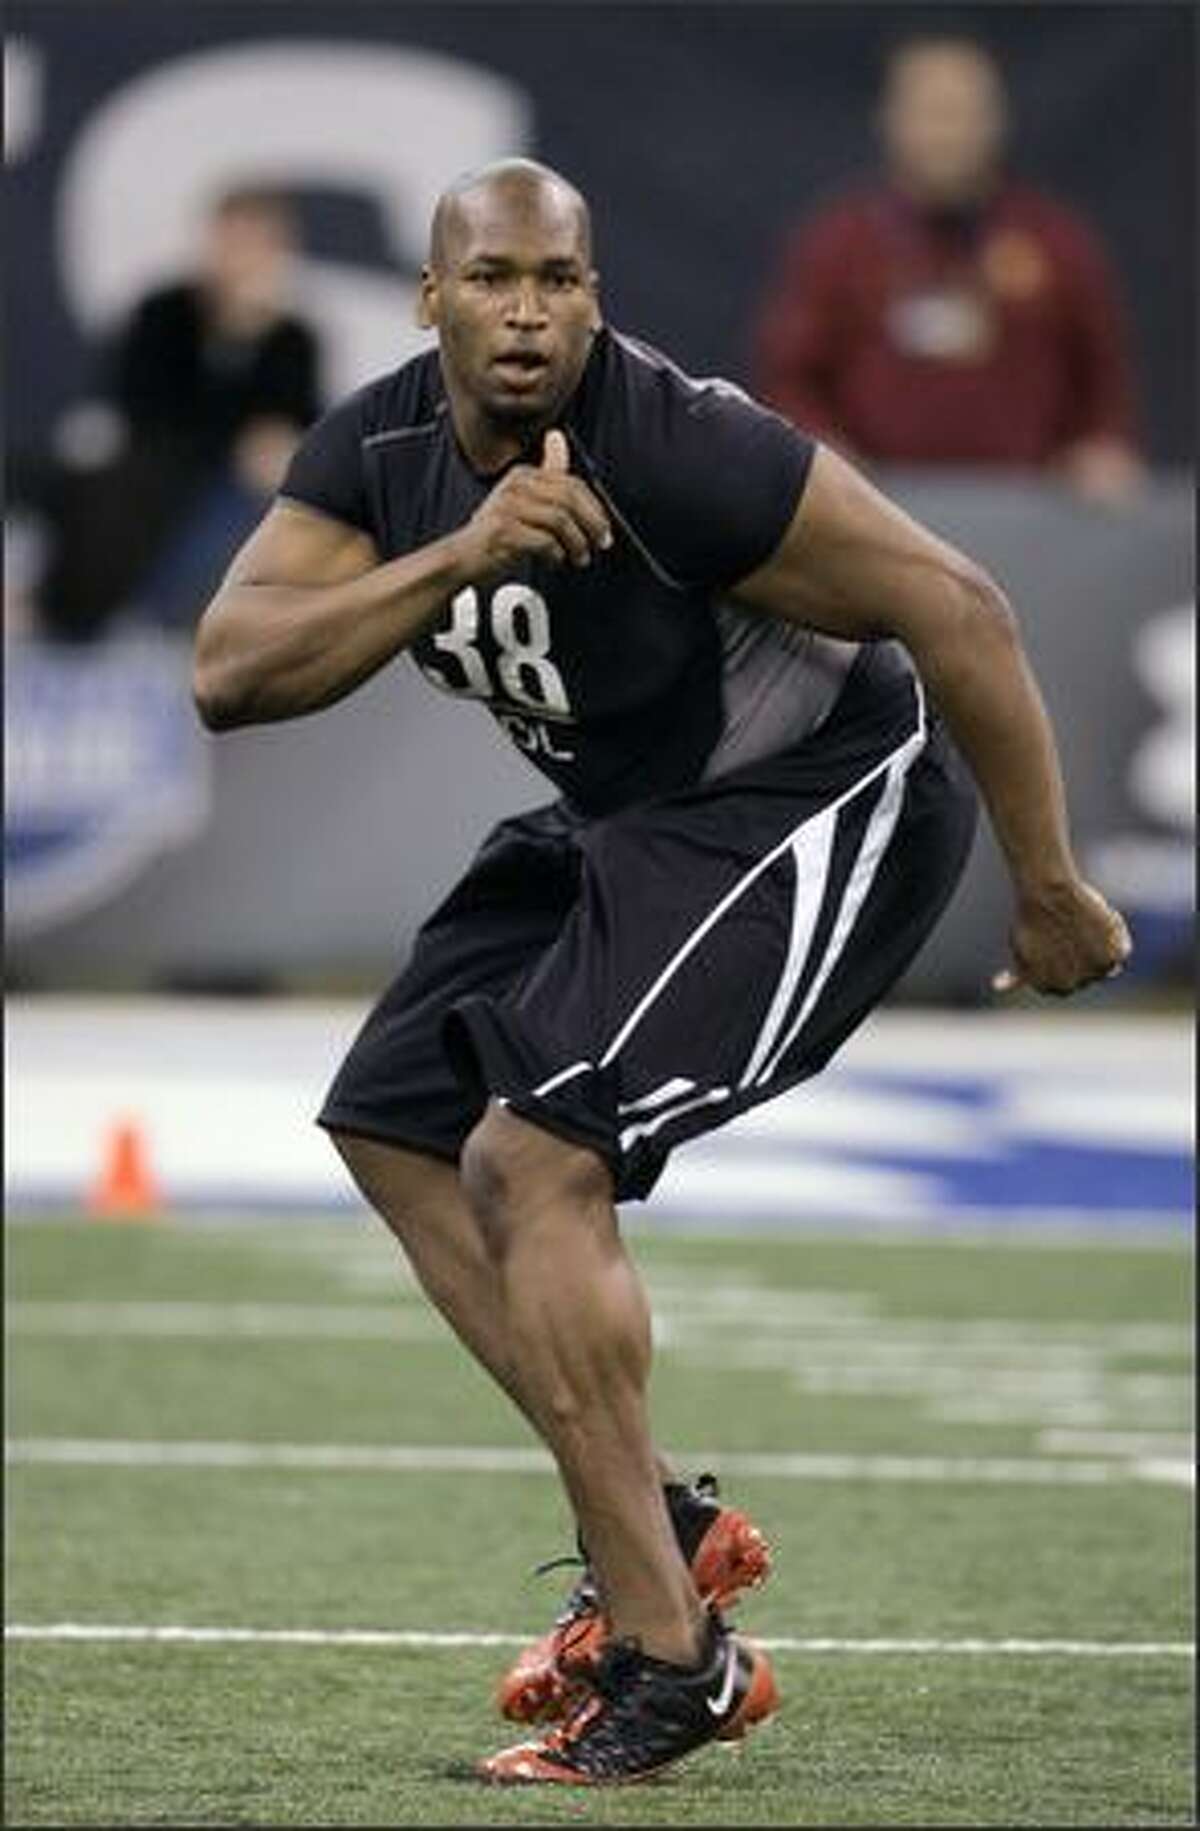 In this Feb. 21, 2009 file photo, Virginia offensive lineman Eugene Monroe runs a drill at the NFL Scouting Combine in Indianapolis. Monroe is a top prospect in the 2009 NFL Draft. (AP Photo/Darron Cummings, File)